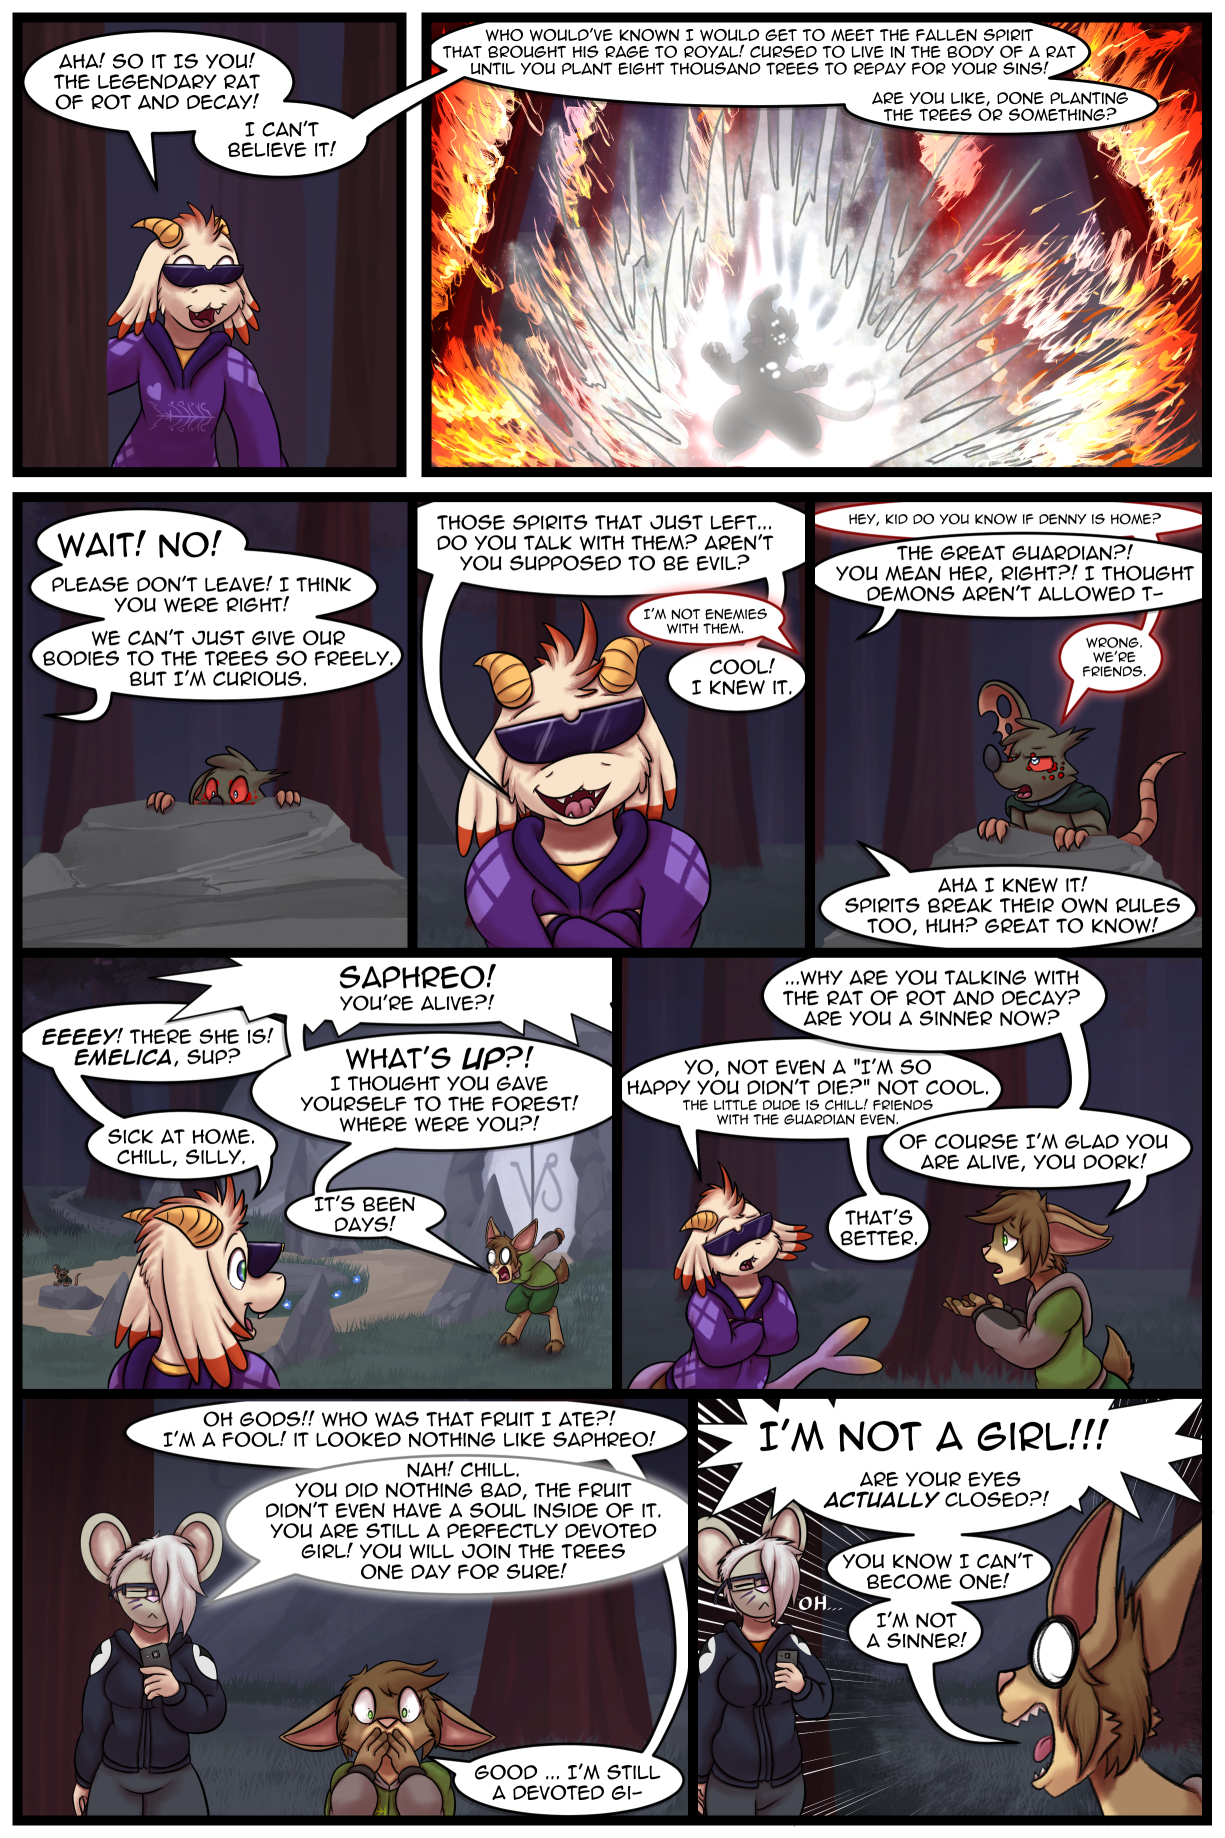 Ch5 Page 27 – Mergoat